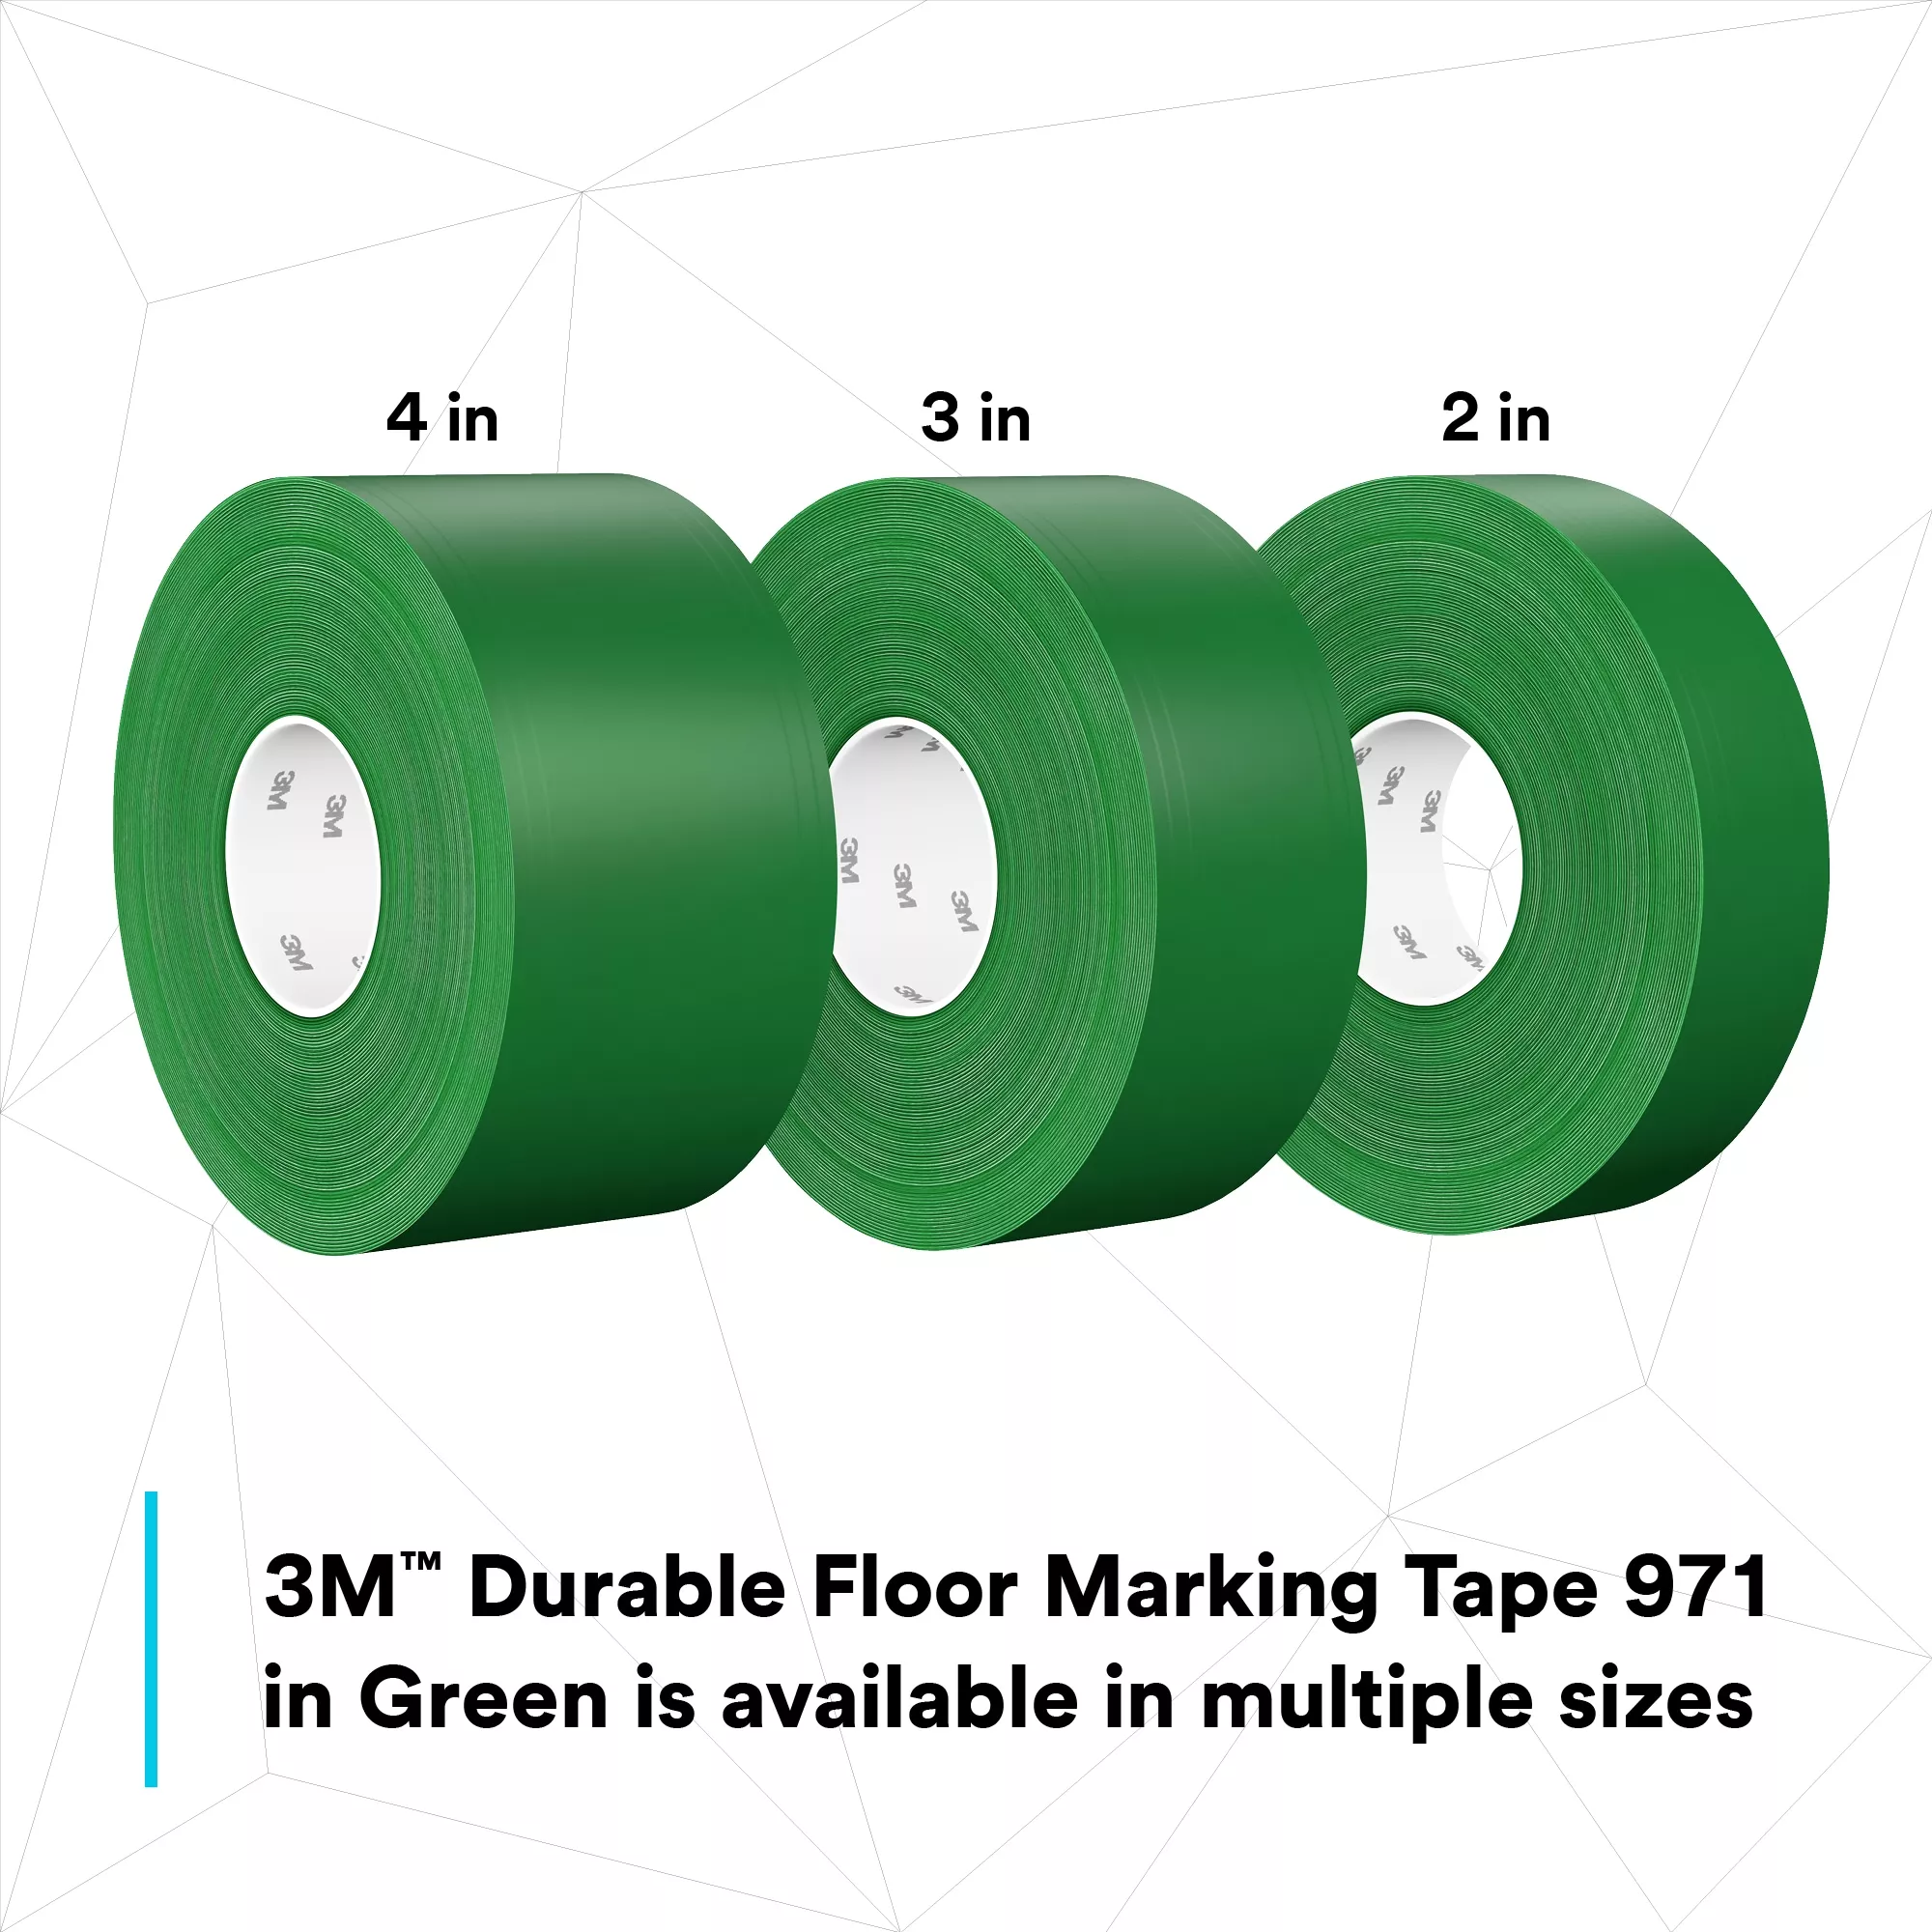 Product Number 971 | 3M™ Durable Floor Marking Tape 971